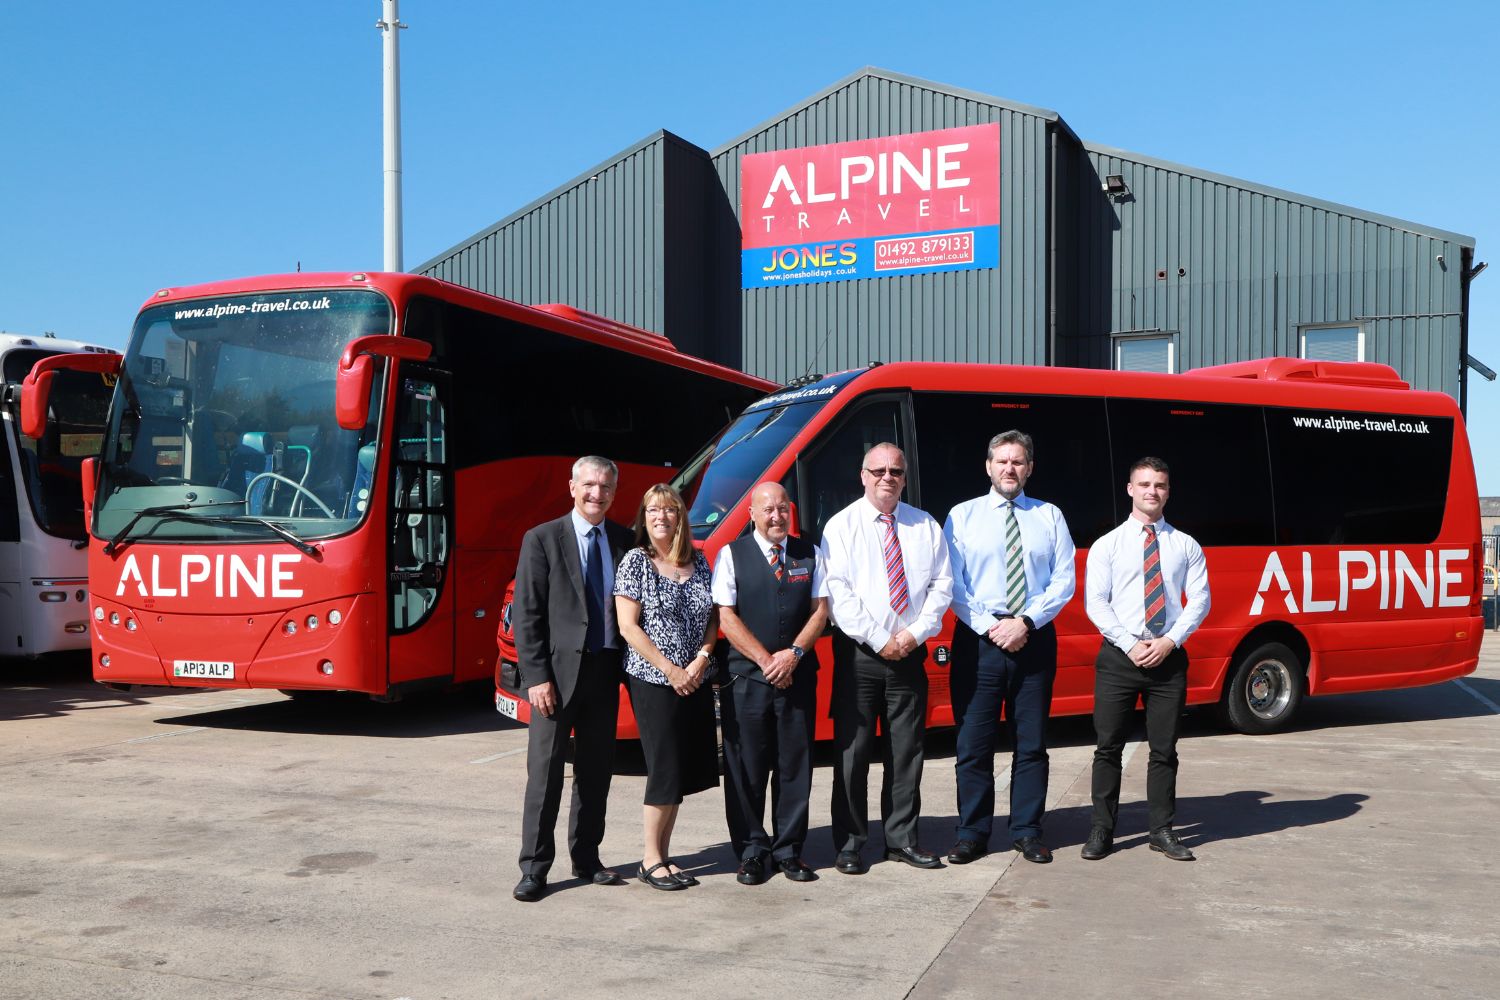 Chris and Sally Owens (left) with Mike Woodyat (in house trained tour driver), Mike Spotswood (Compliance Manager) Terrance Jones (Head of Operations) and Daniel Cuthbert (Llandudno Depot Manager) in front of Alpine Travel’s latest Noone minicoach and the Llandudno depot building